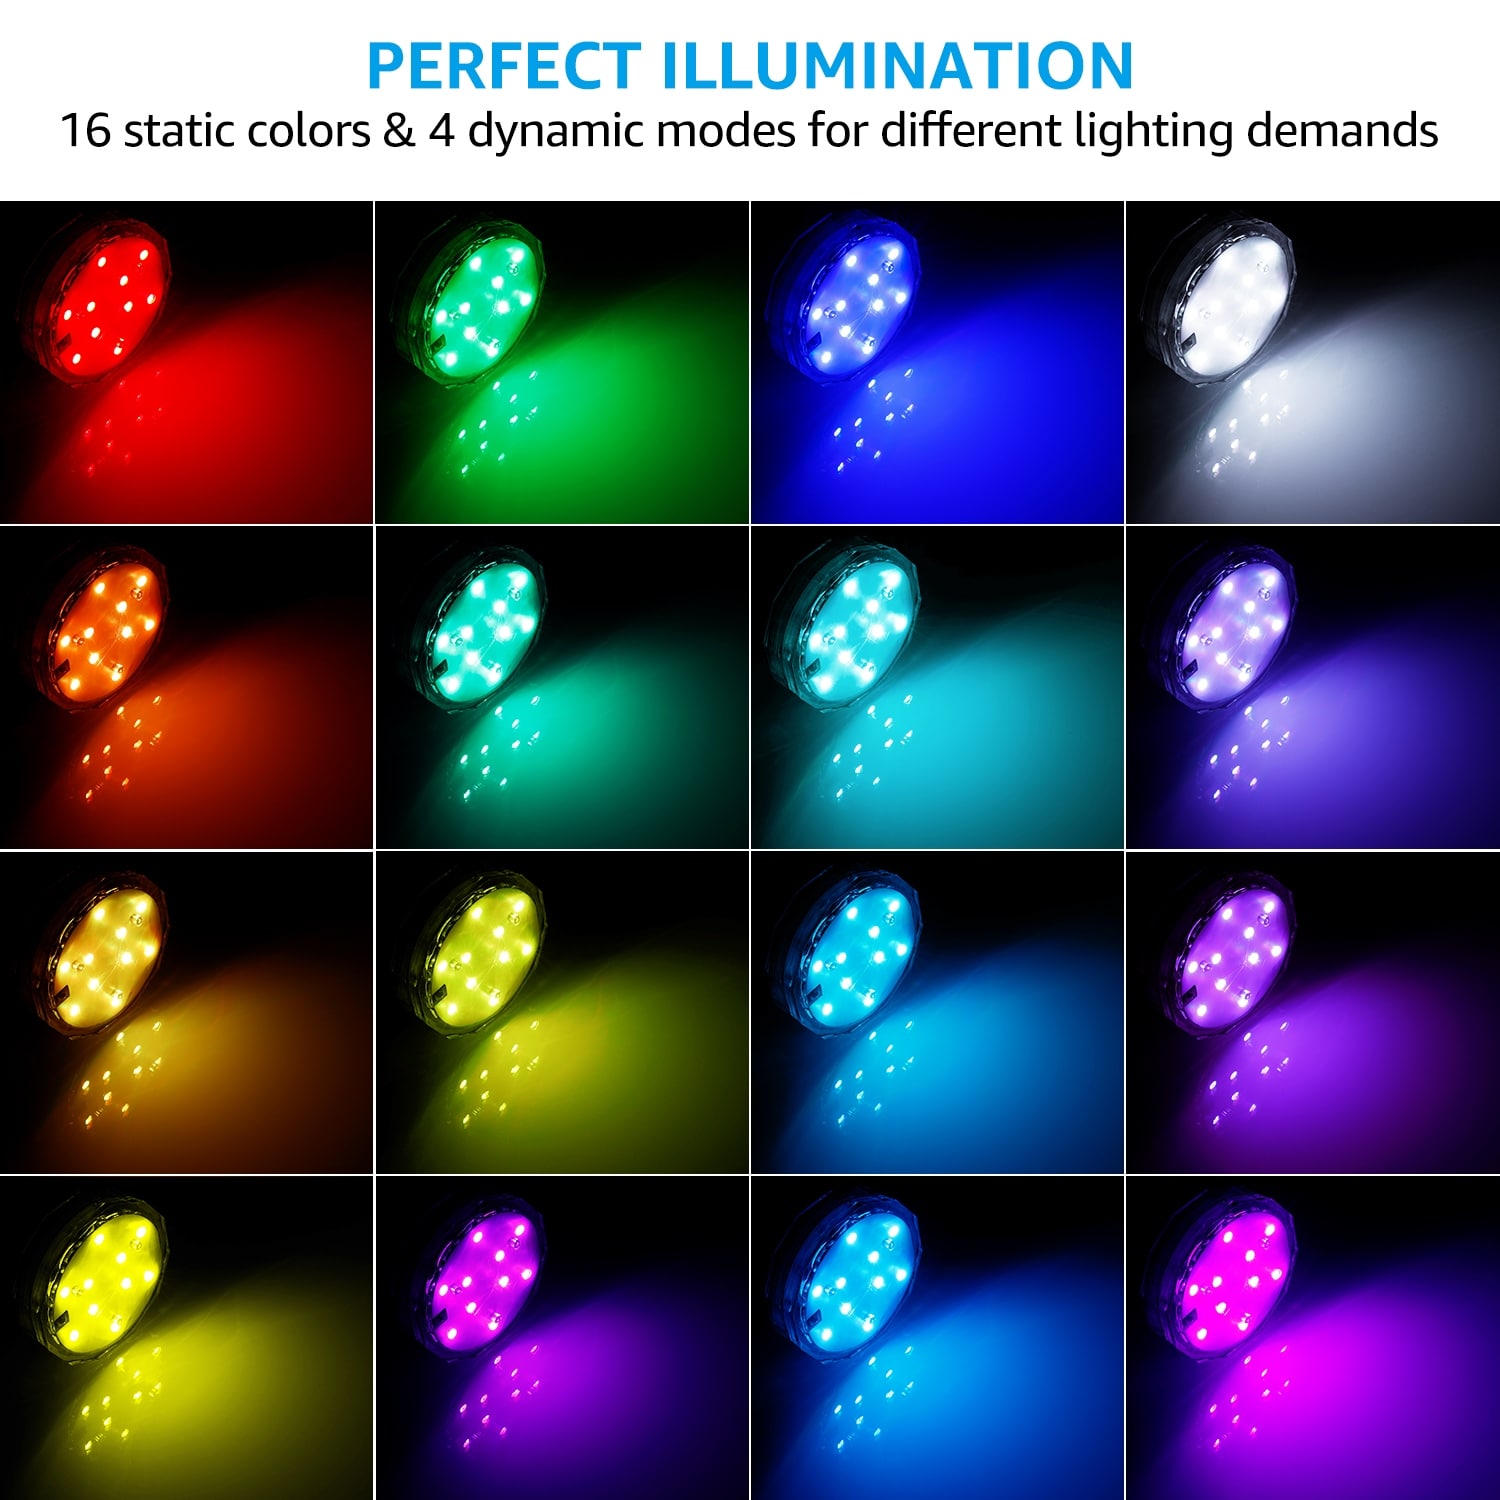 Submersible Led Lights Battery Operated Spot Lights With Remote 4 Pack White 